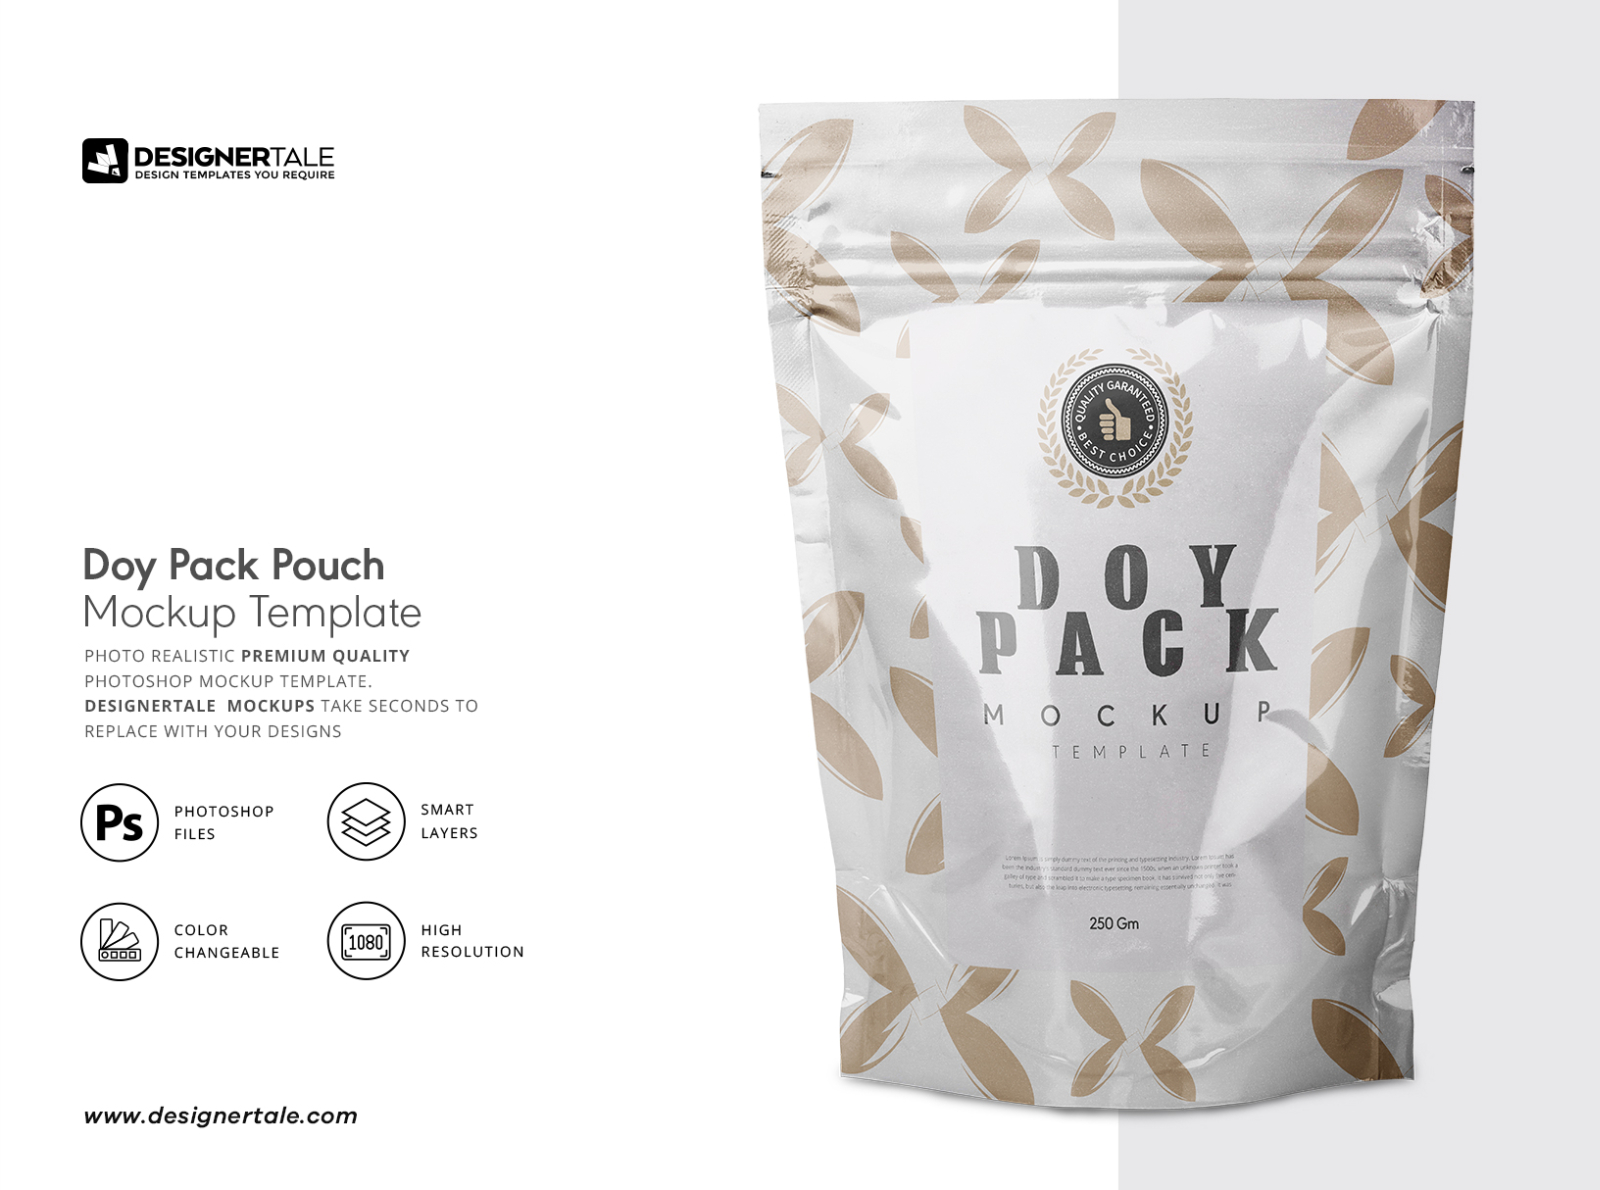 Download Doy pack pouch mock up by designertale on Dribbble